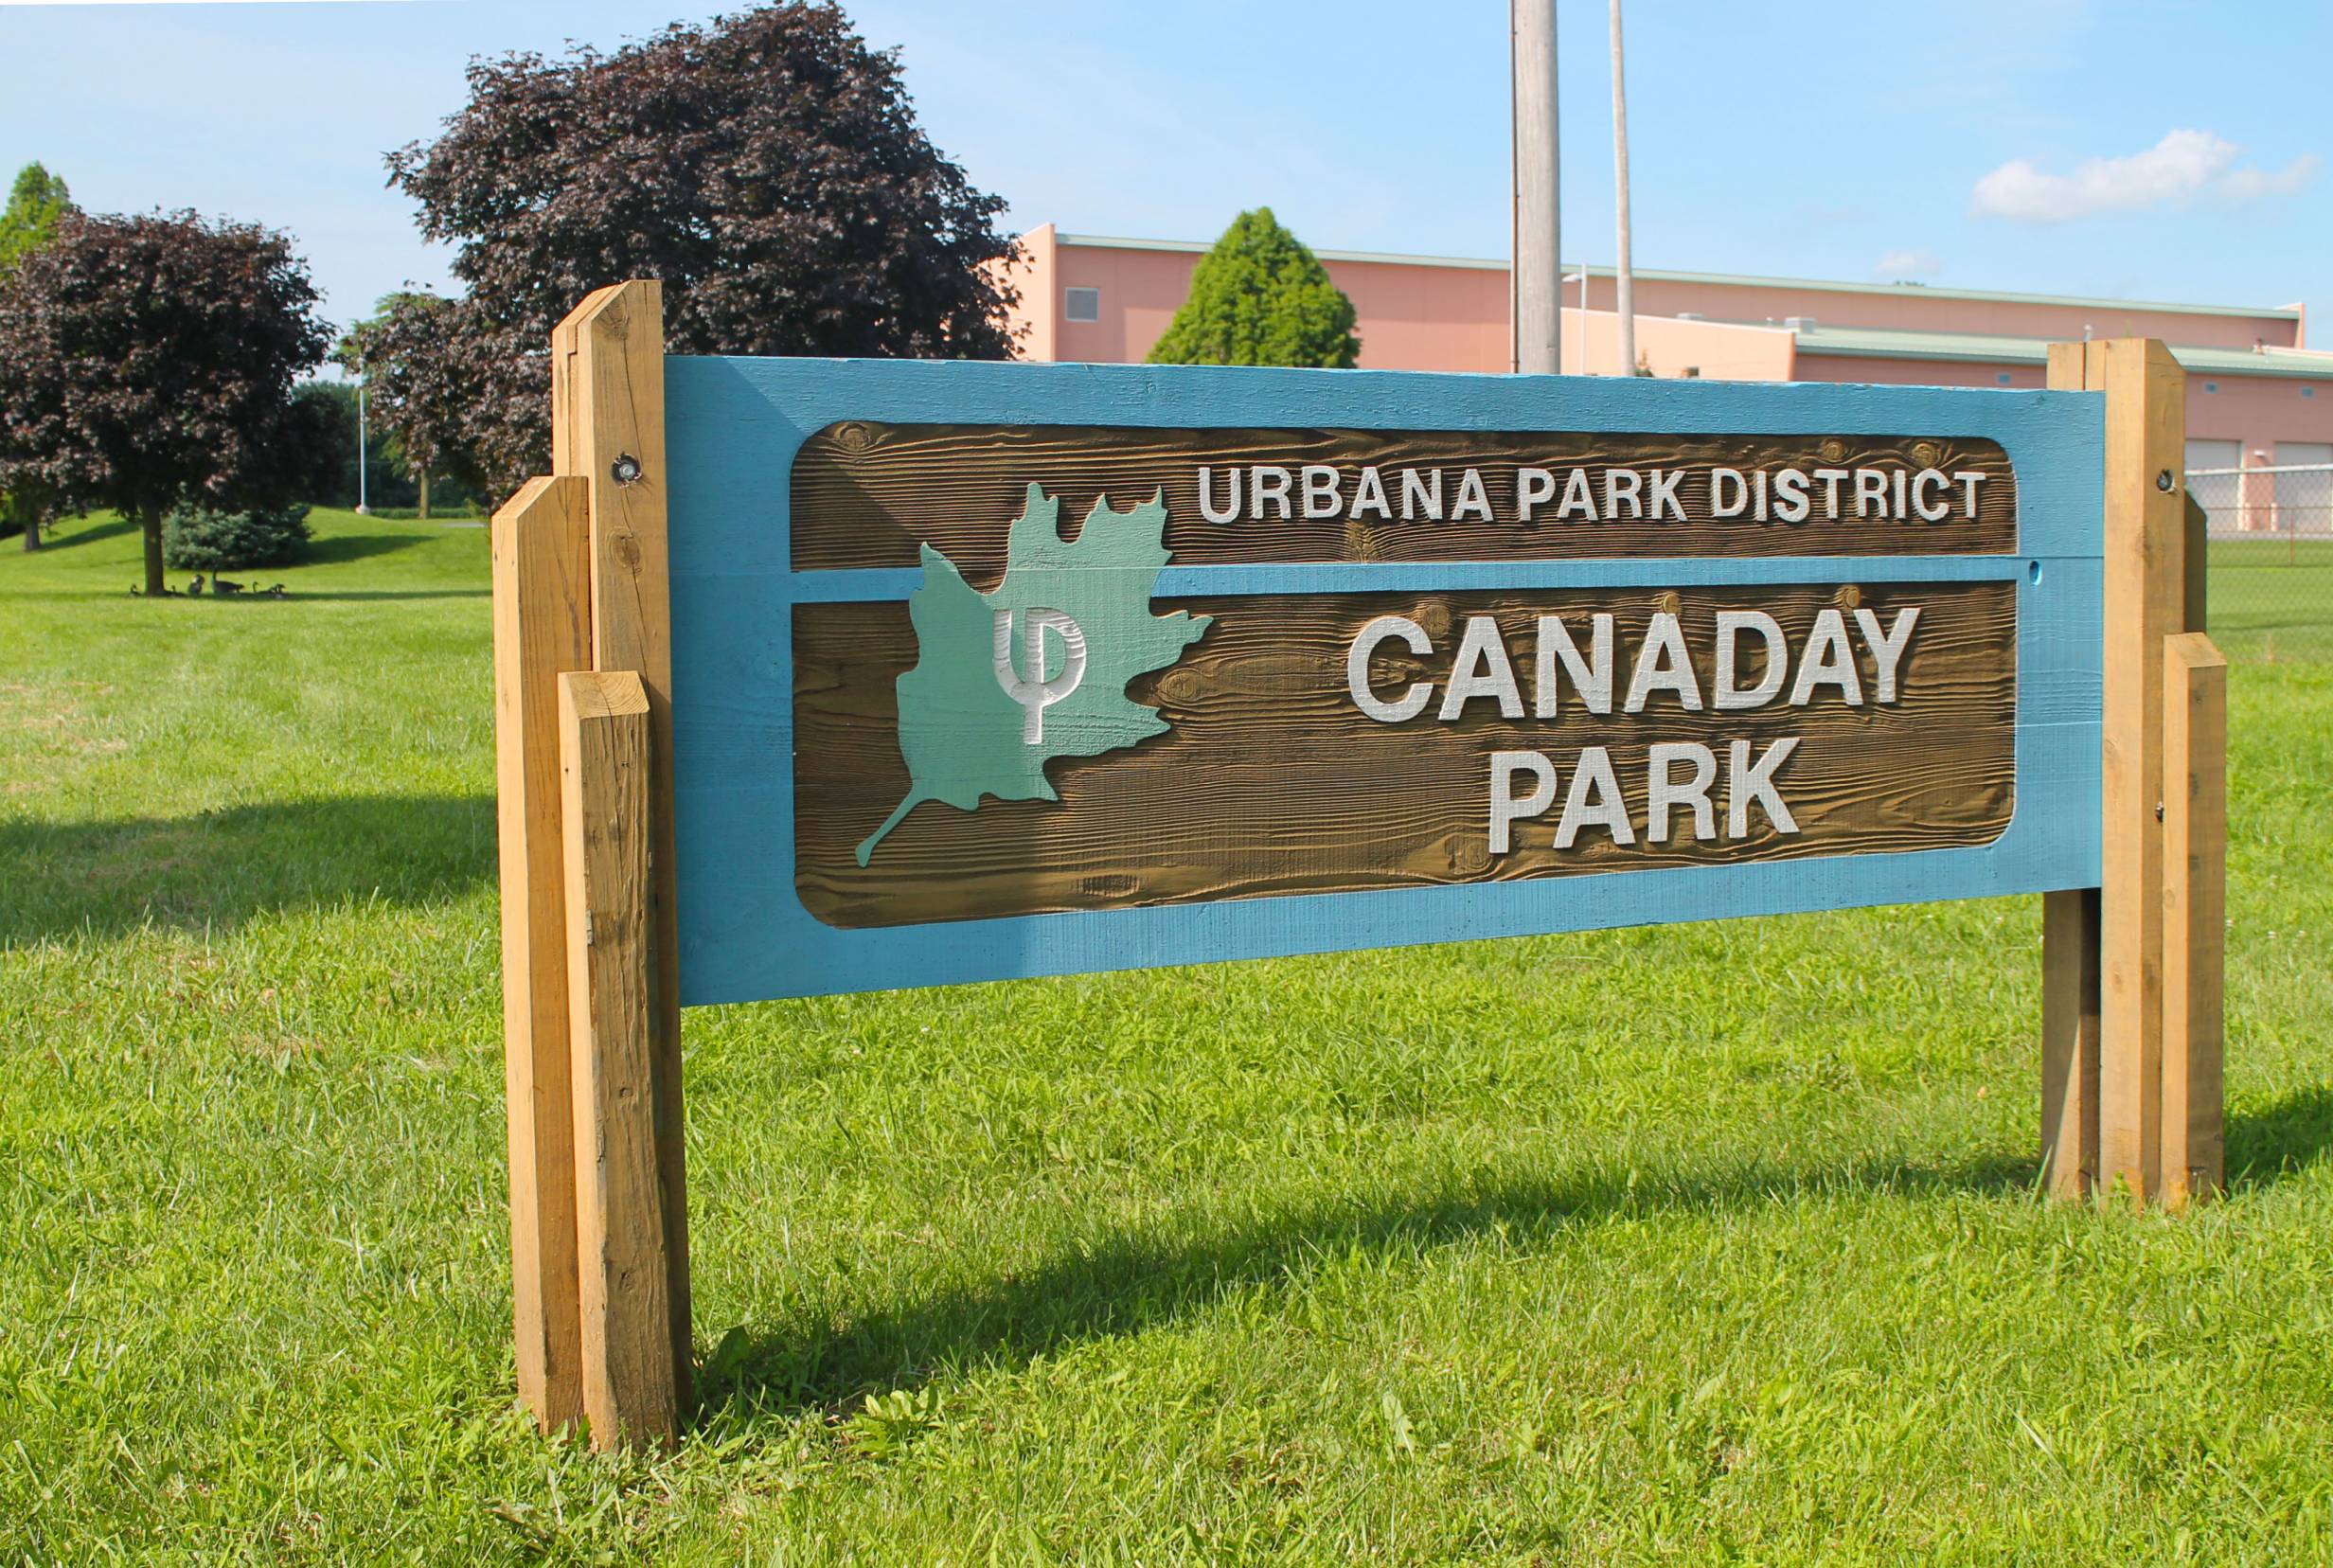 Year of the Park, A to Z: Canaday Park, Urbana